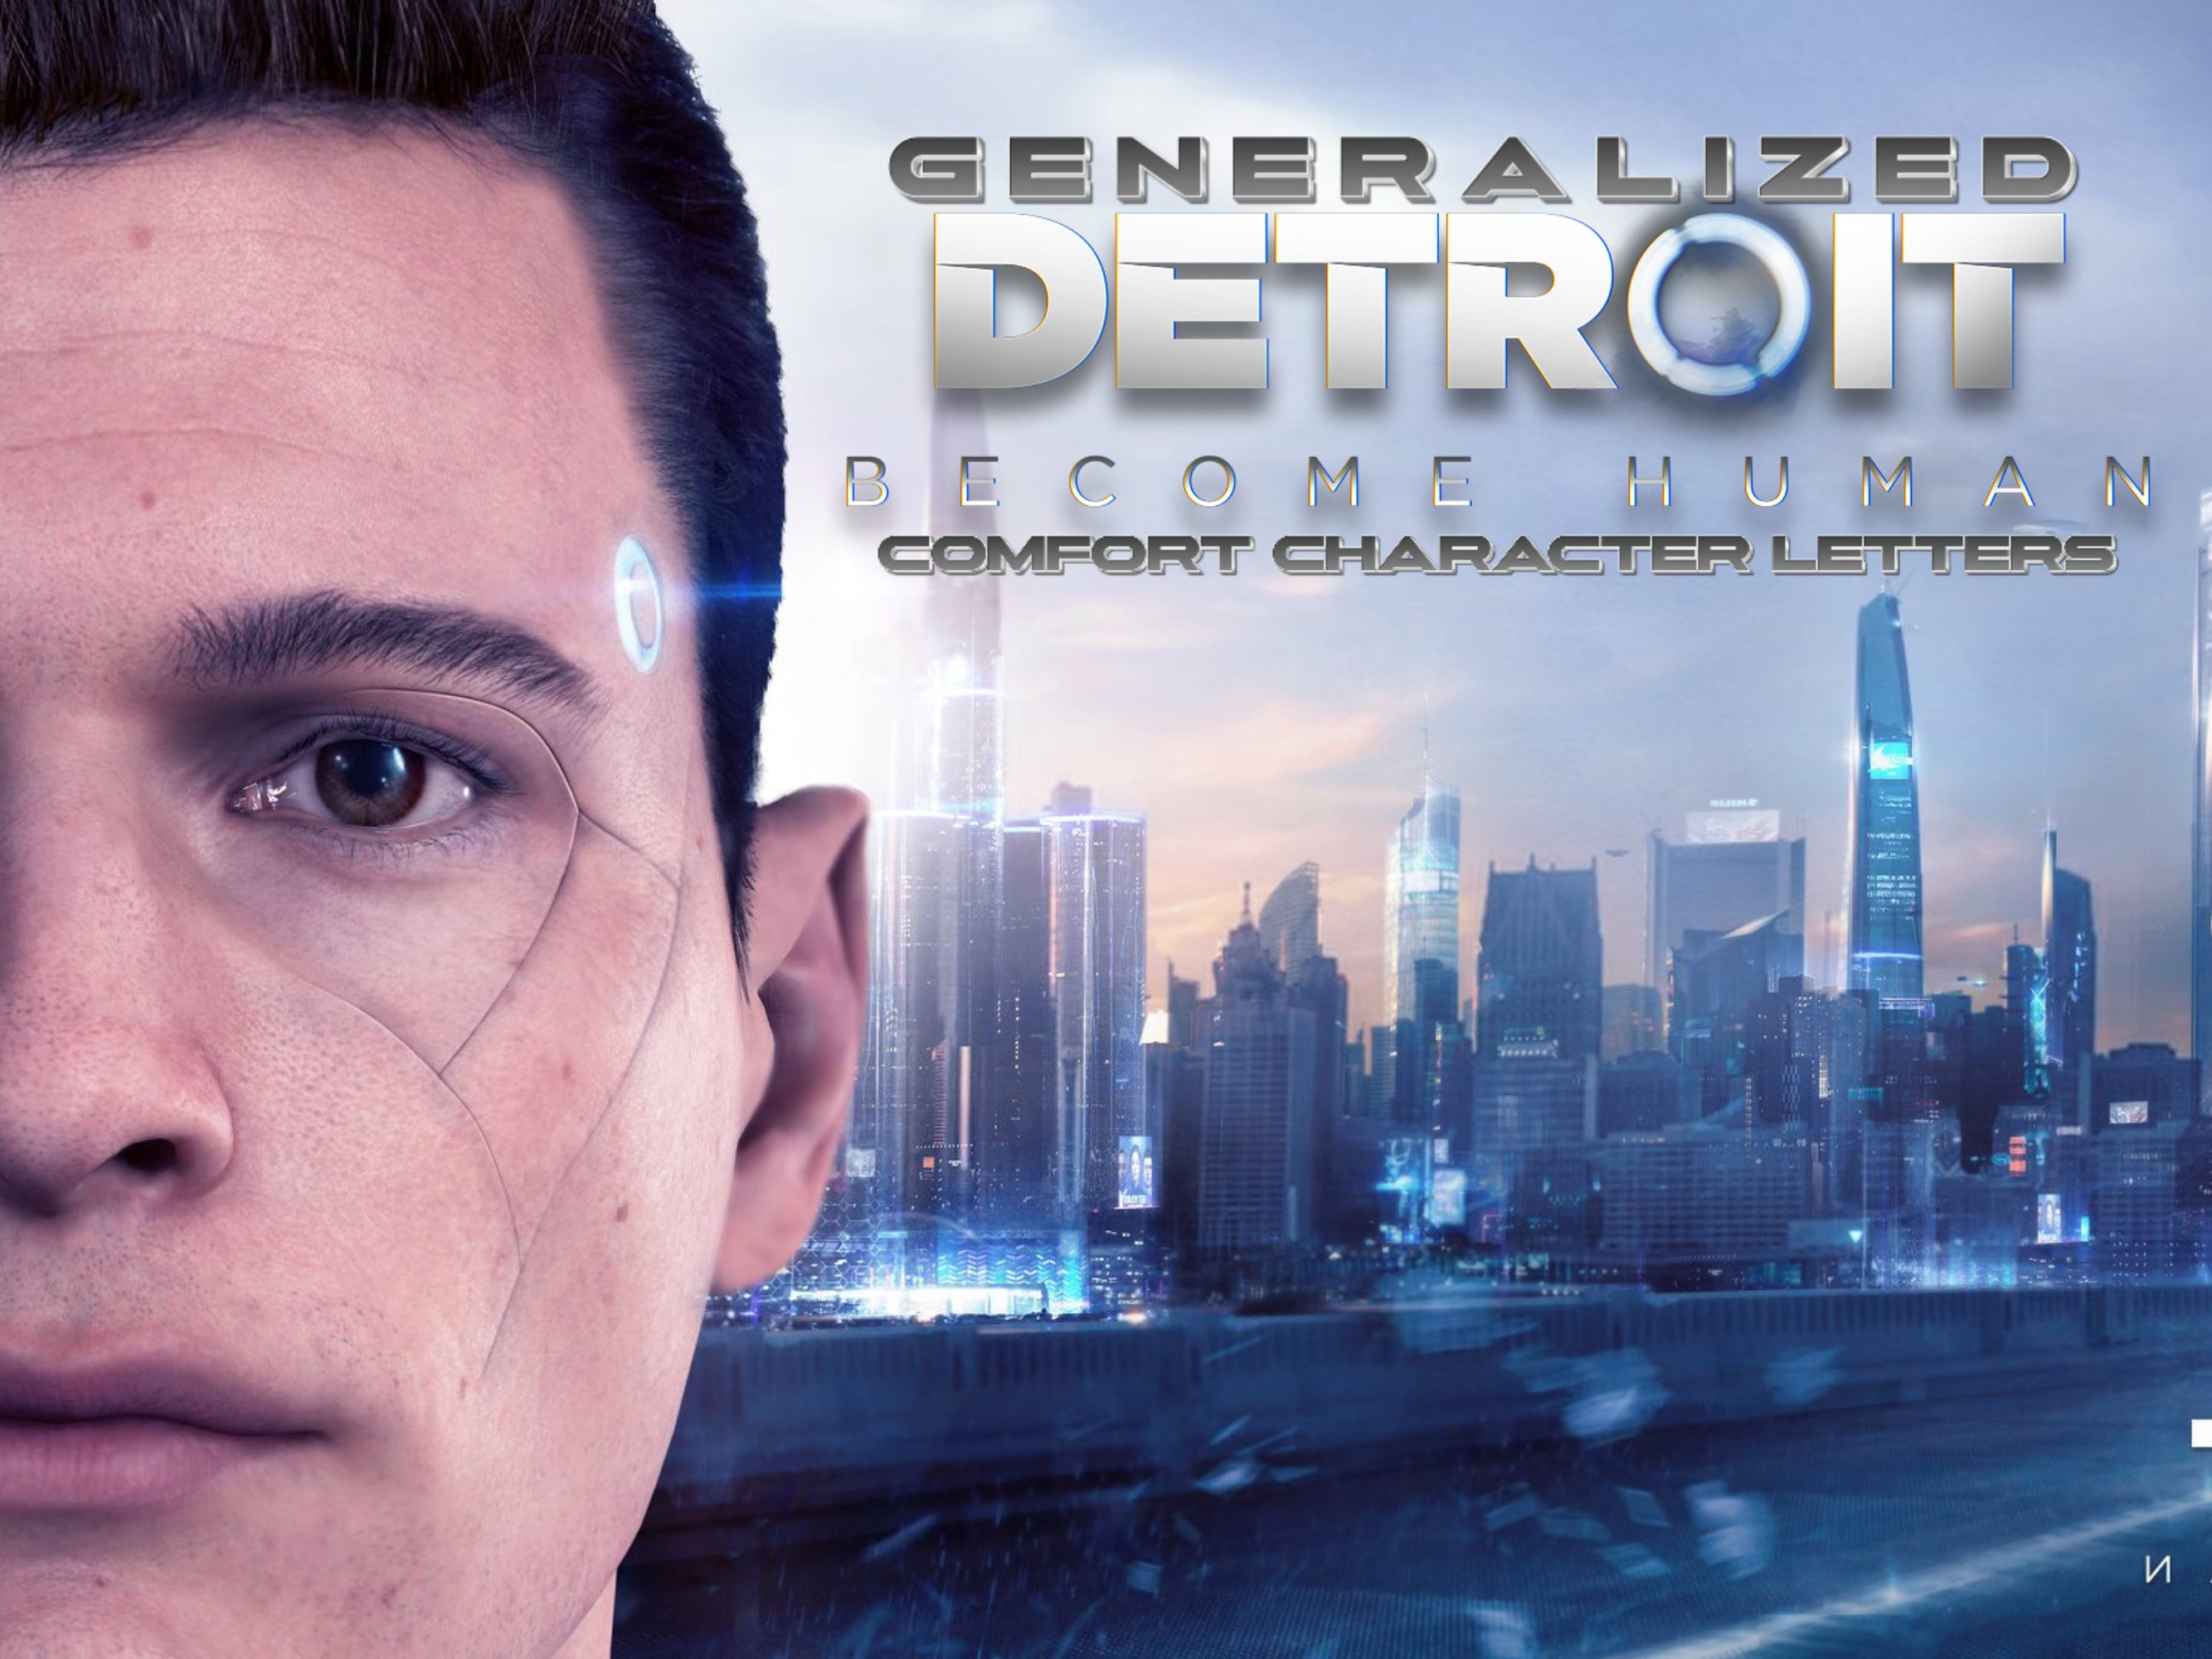 Detroit Become Human Markus Cosplay RK200 Android Decal 